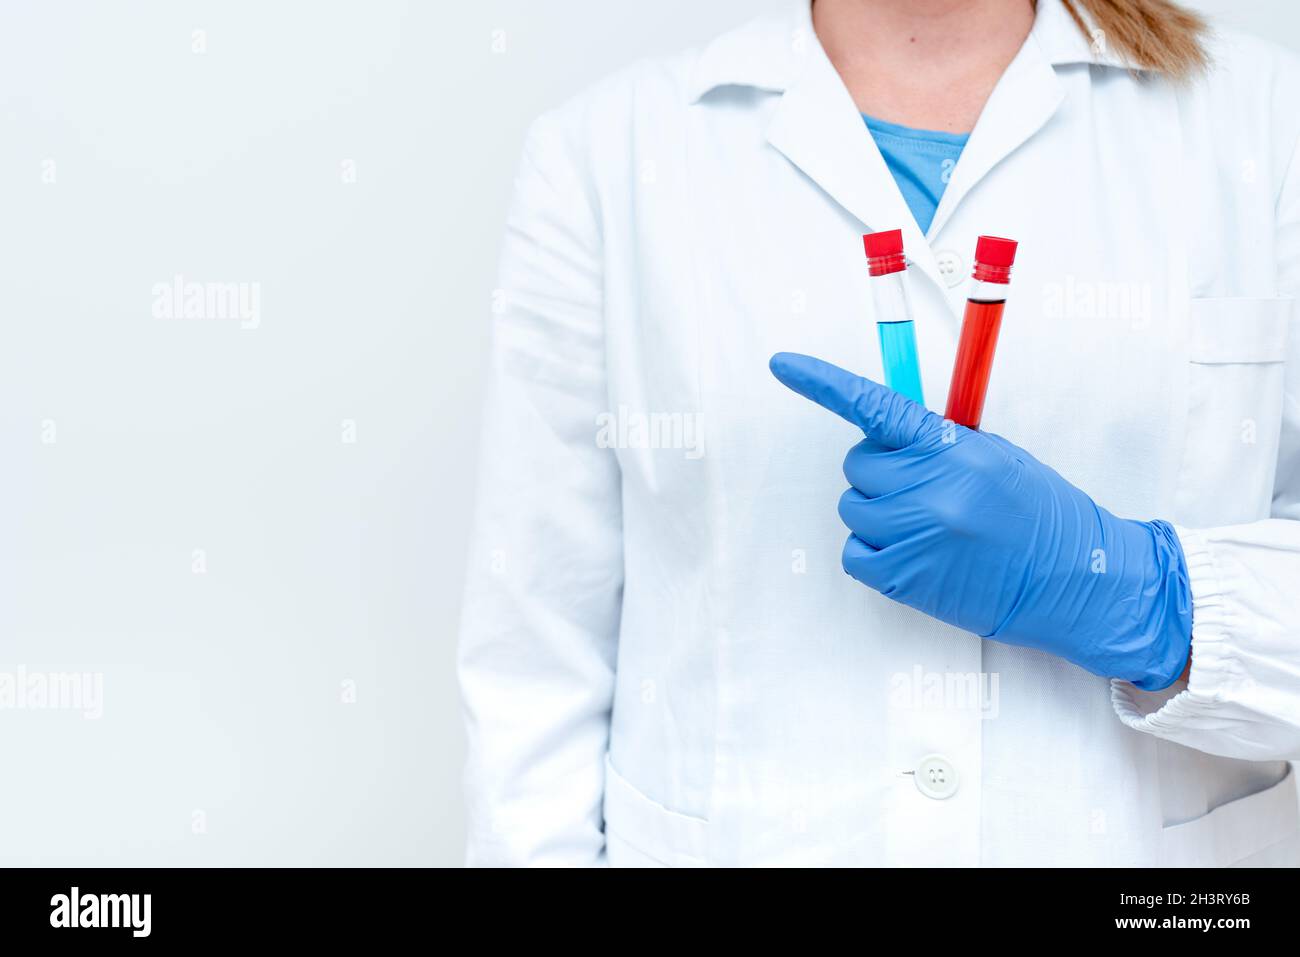 Testing Medicine Vaccine Virus Infection Laboratory Trial Tests Performing Experiment Presentations Science Discussions Occupati Stock Photo